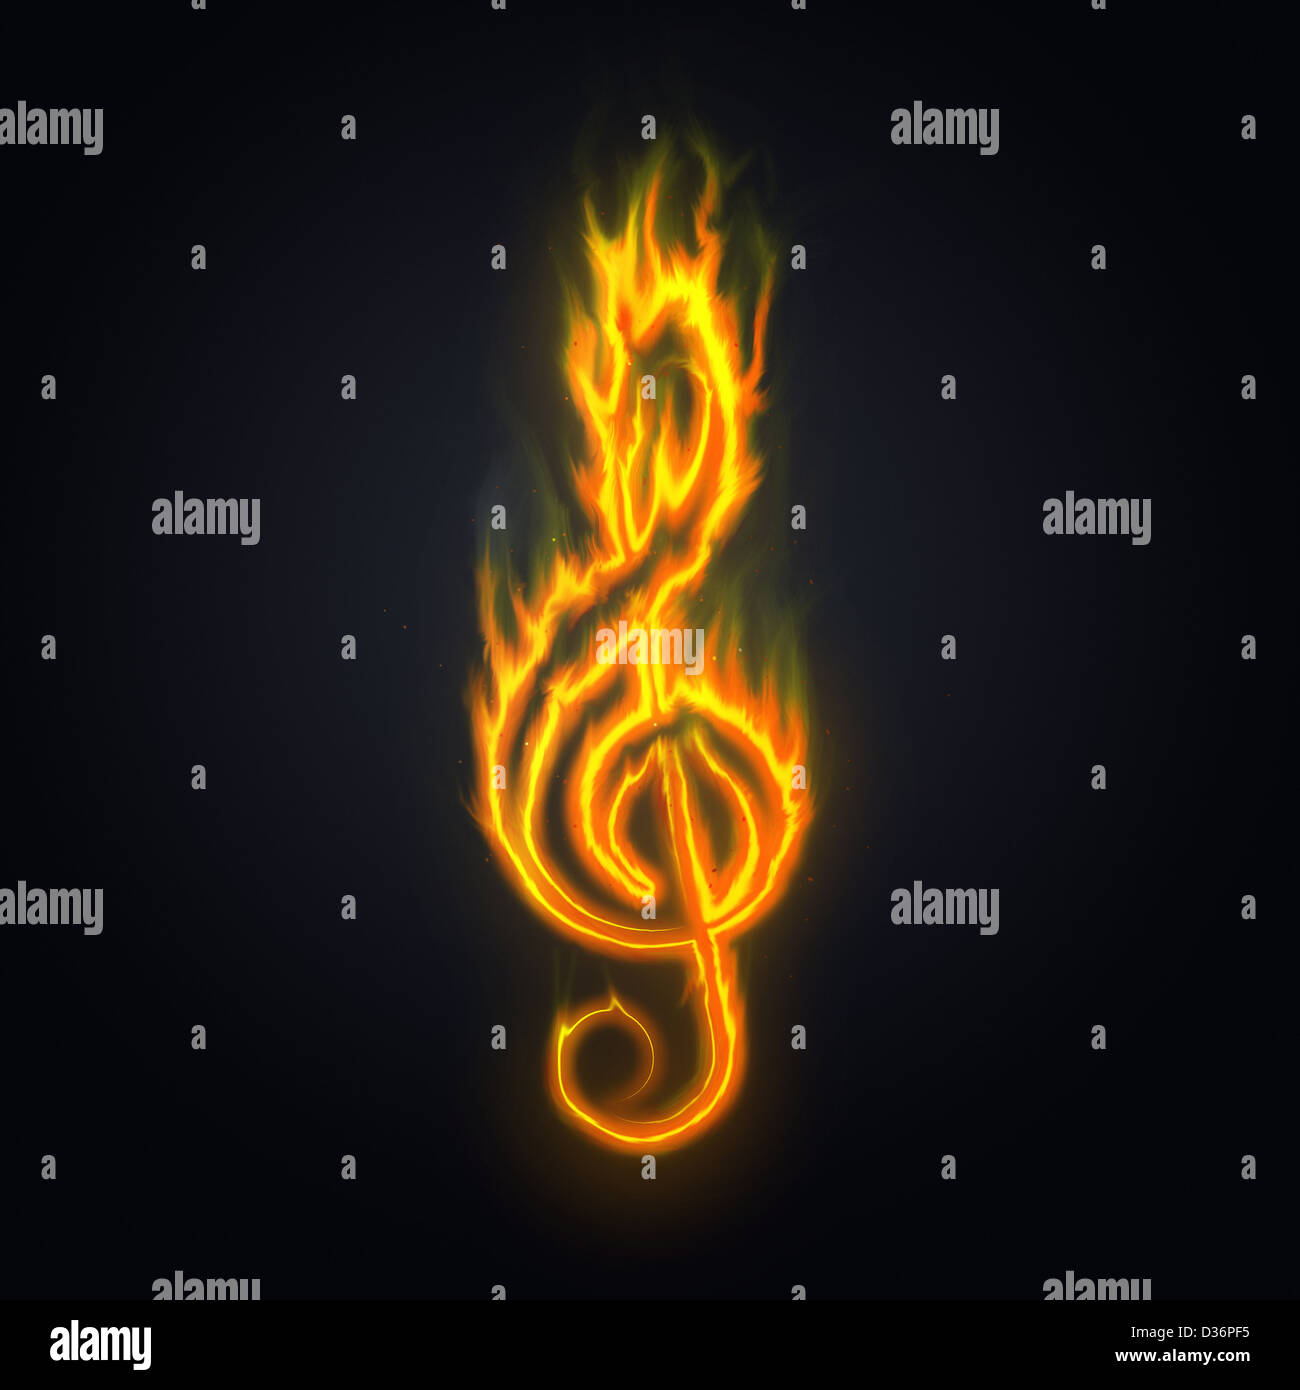 Treble clef, music or violin key on fire over a dark background. Stock Photo